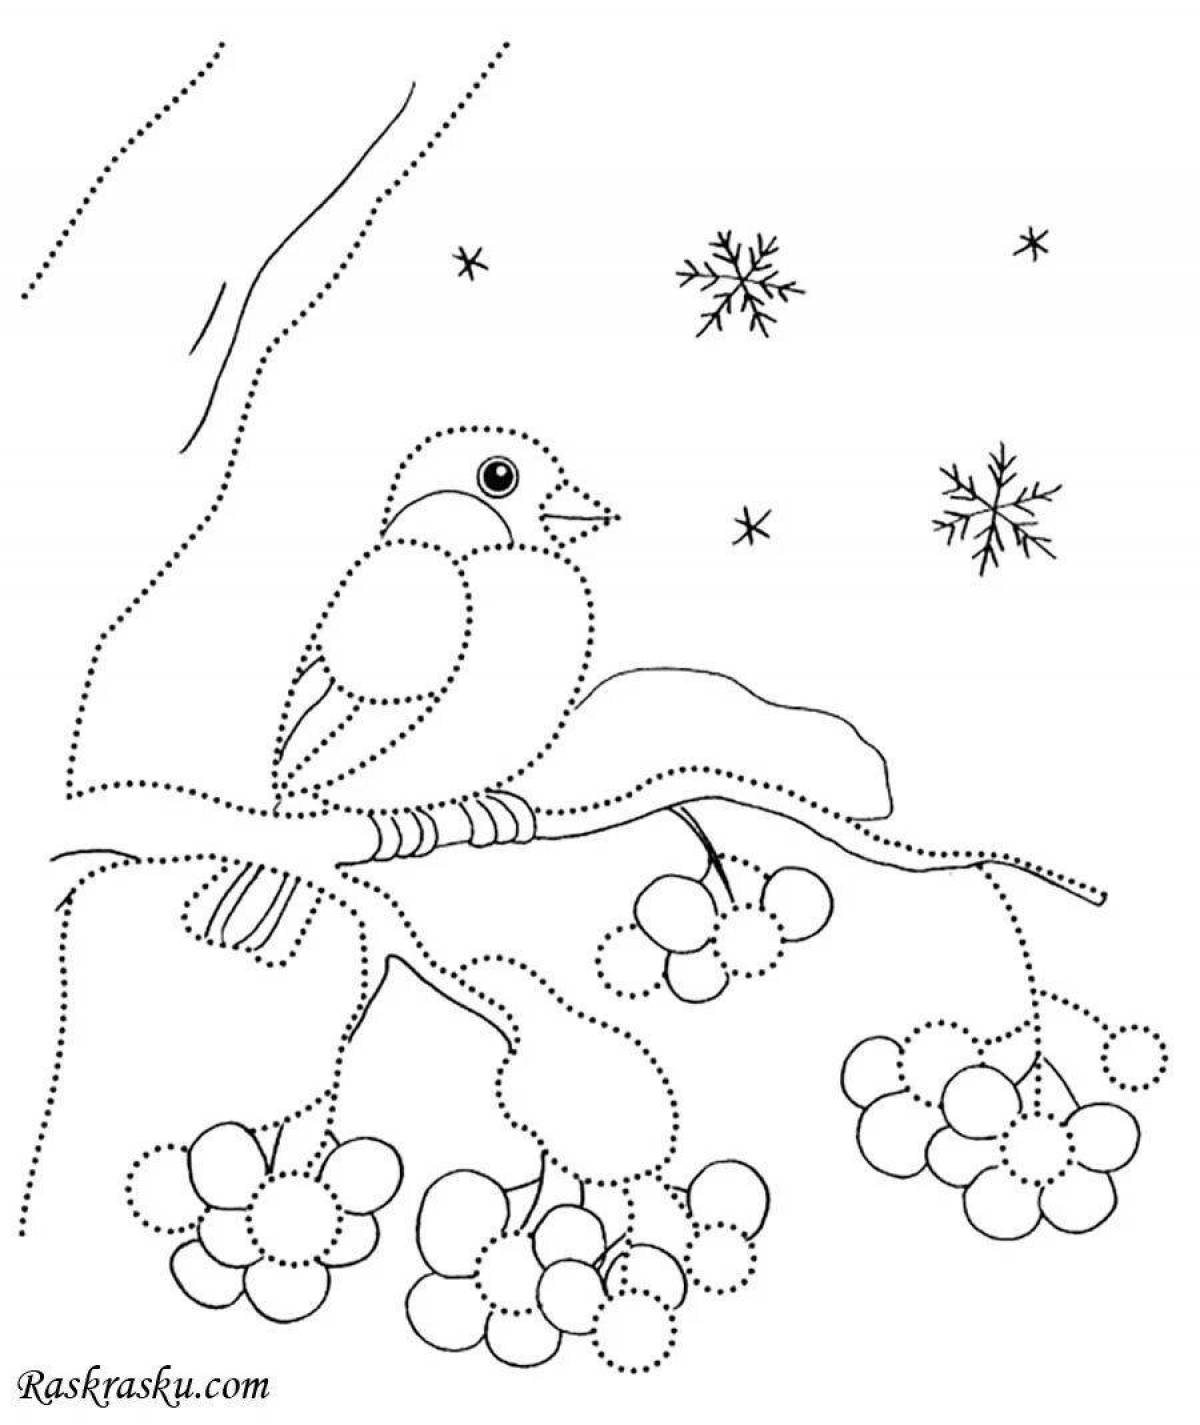 Cute winter birds coloring pages for kids